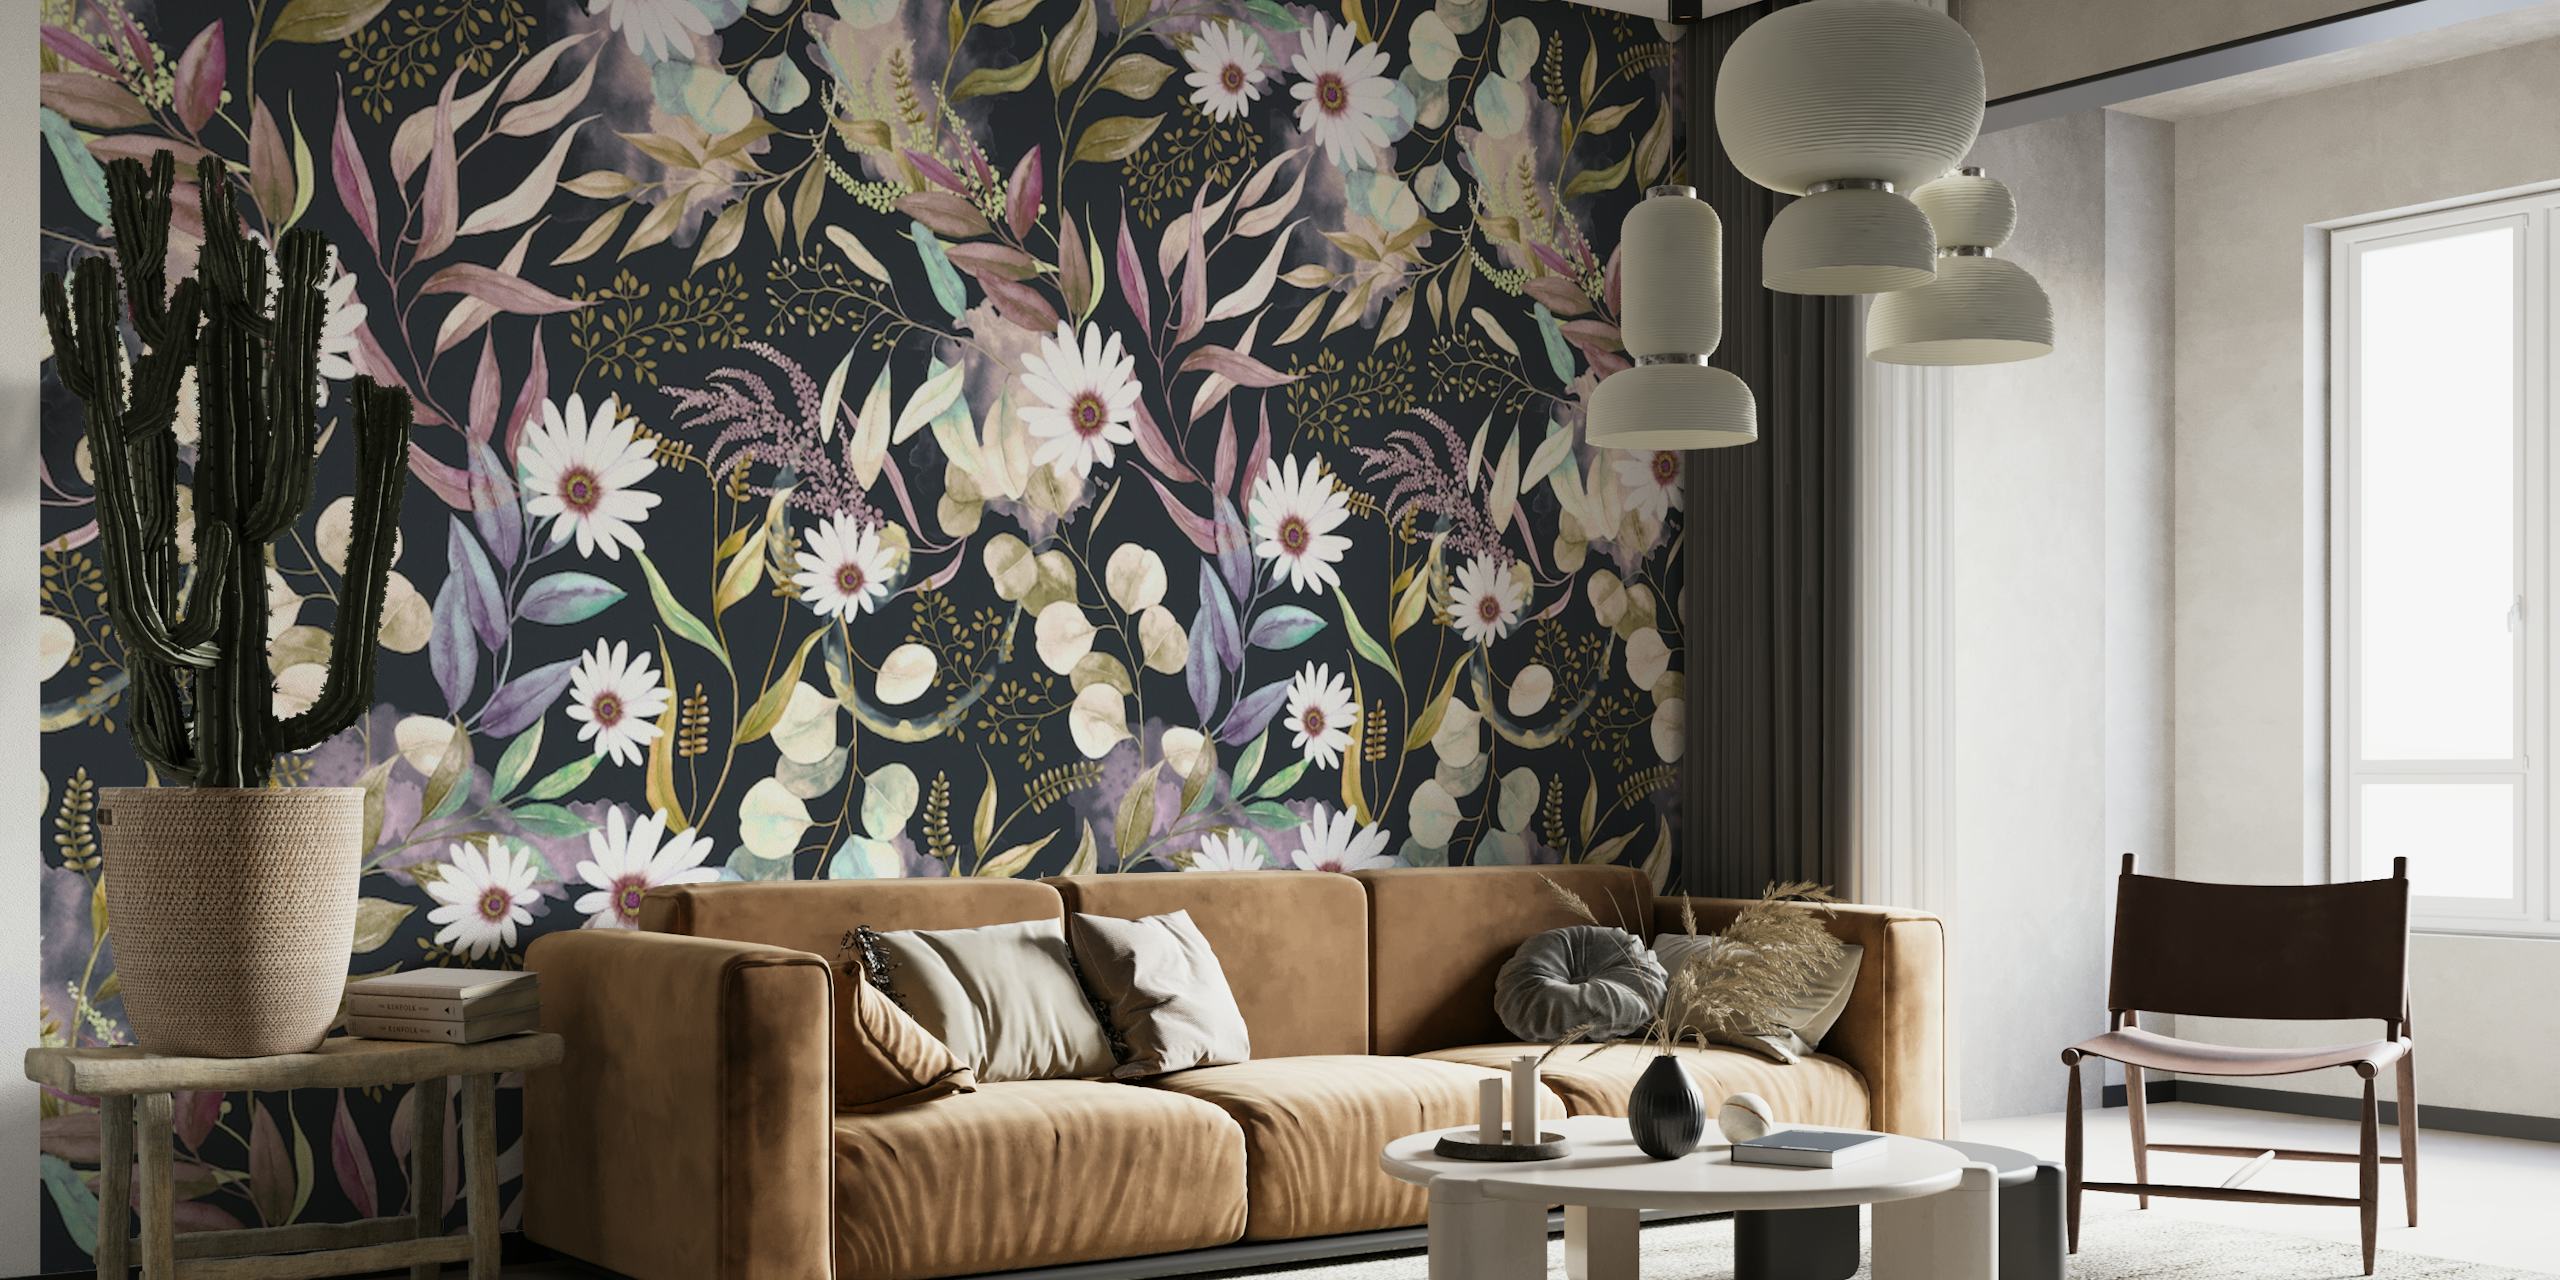 Enigmatic dark floral pattern wall mural from happywall.com